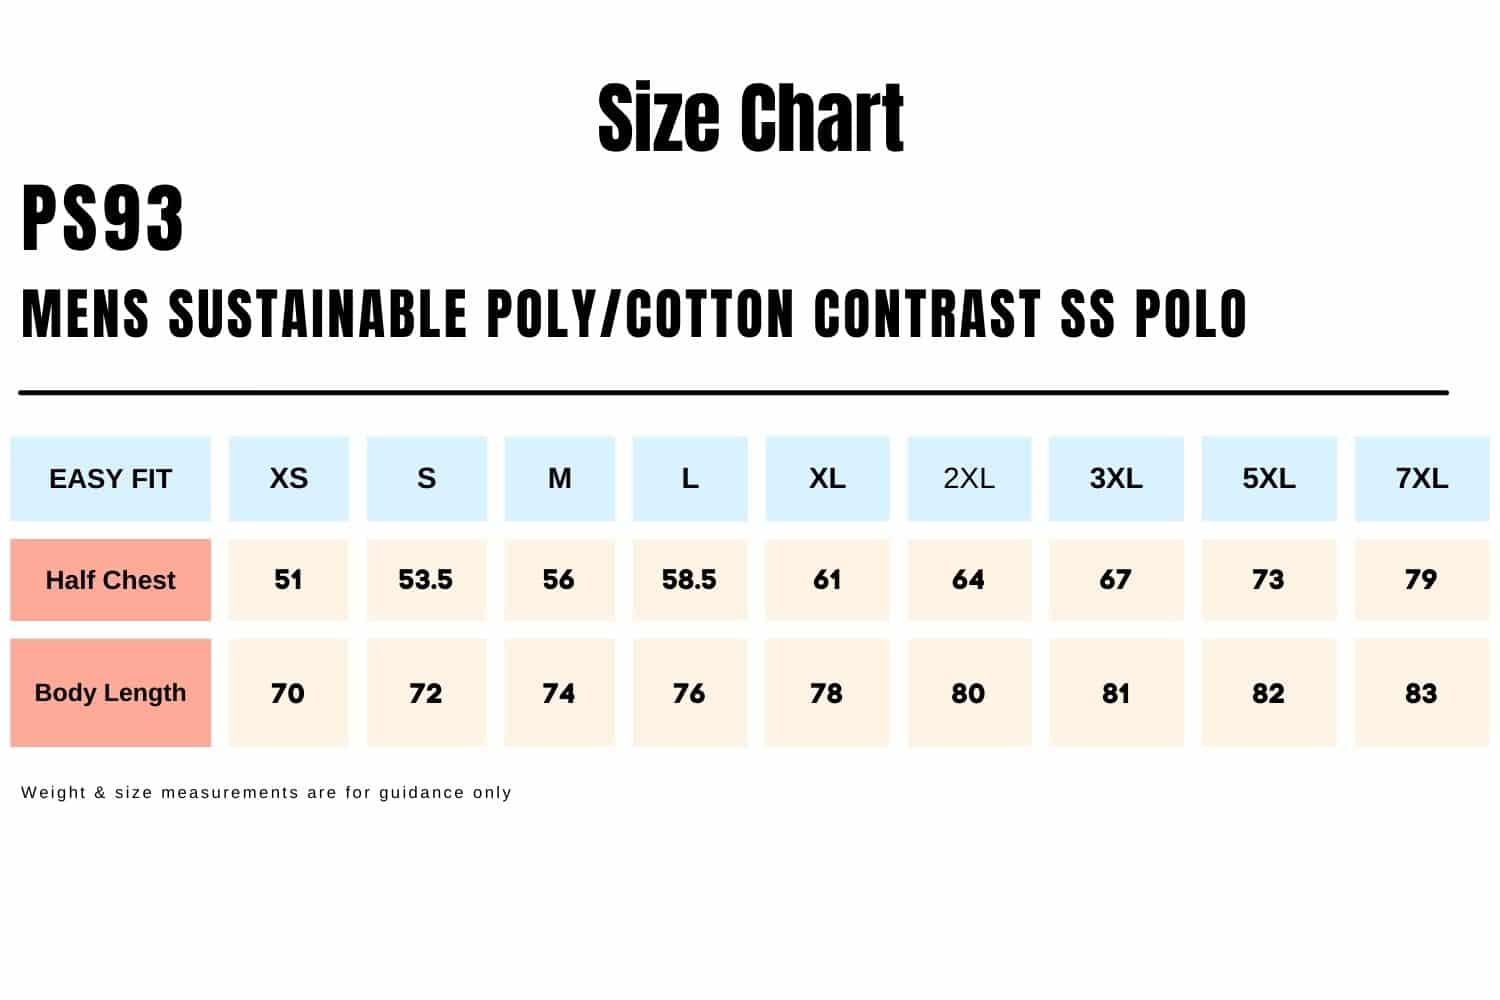 Size-Chart_PS93-MENS-SUSTAINABLE-POLYCOTTON-CONTRAST-SS-POLO